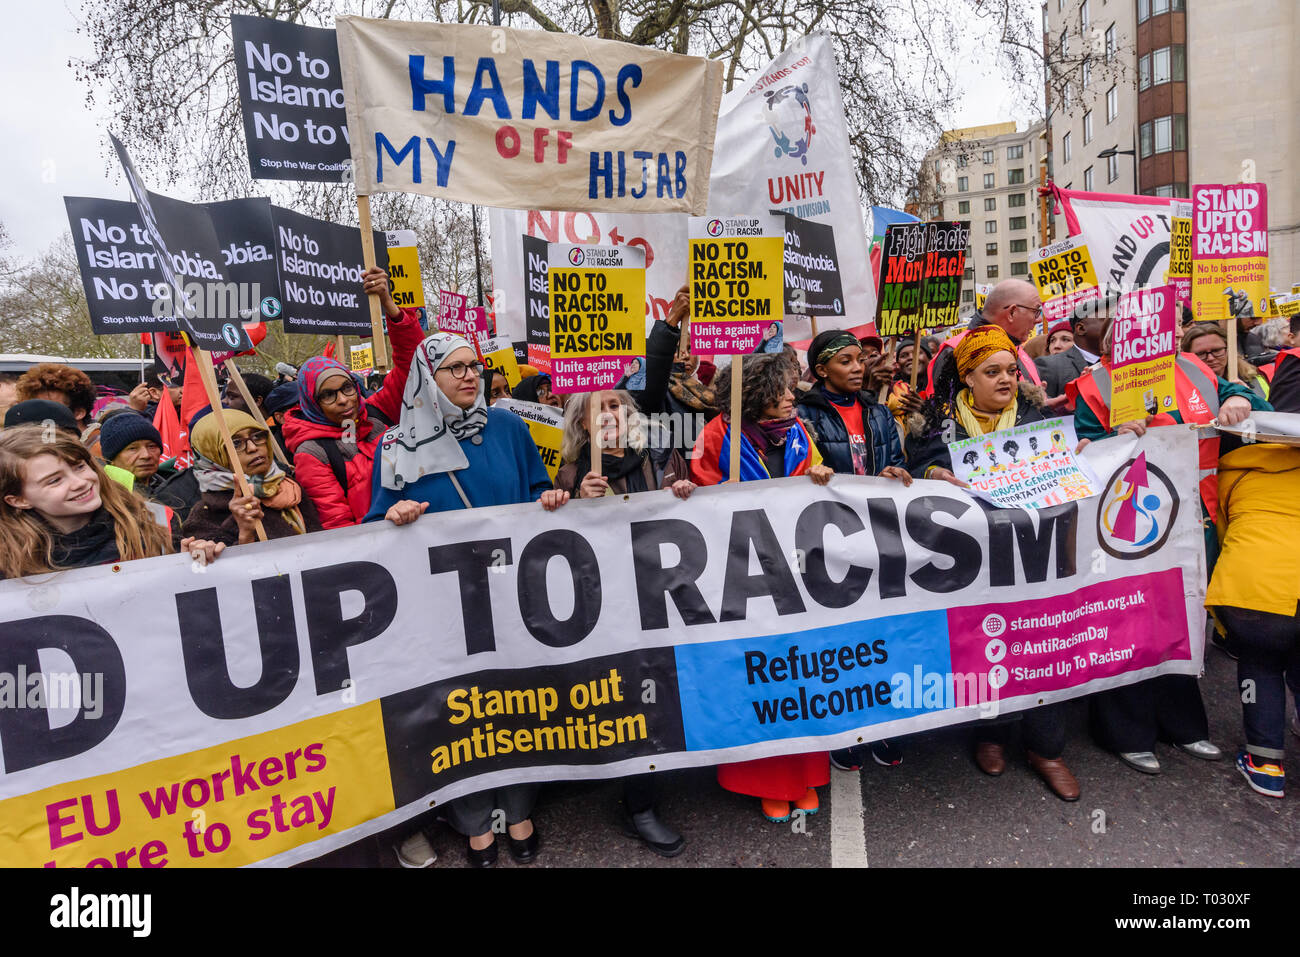 London, UK. 16th March 2019. Banner at the front of the march by thousands through London on UN Anti-Racism day to say 'No to Racism, No to Fascism' and that 'Refugees Are Welcome Here', to show solidarity with the victims of racist attacks including yesterdays Christchurch mosque attack and to oppose Islamophobic hate crimes and racist policies in the UK and elsewhere. The marchers met in Park Lane where there were a number of speeches before marching to a rally in Whitehall. Marches took place in other cities around the world including Glasgow and Cardiff. Peter Marshall/Alamy Live News Stock Photo